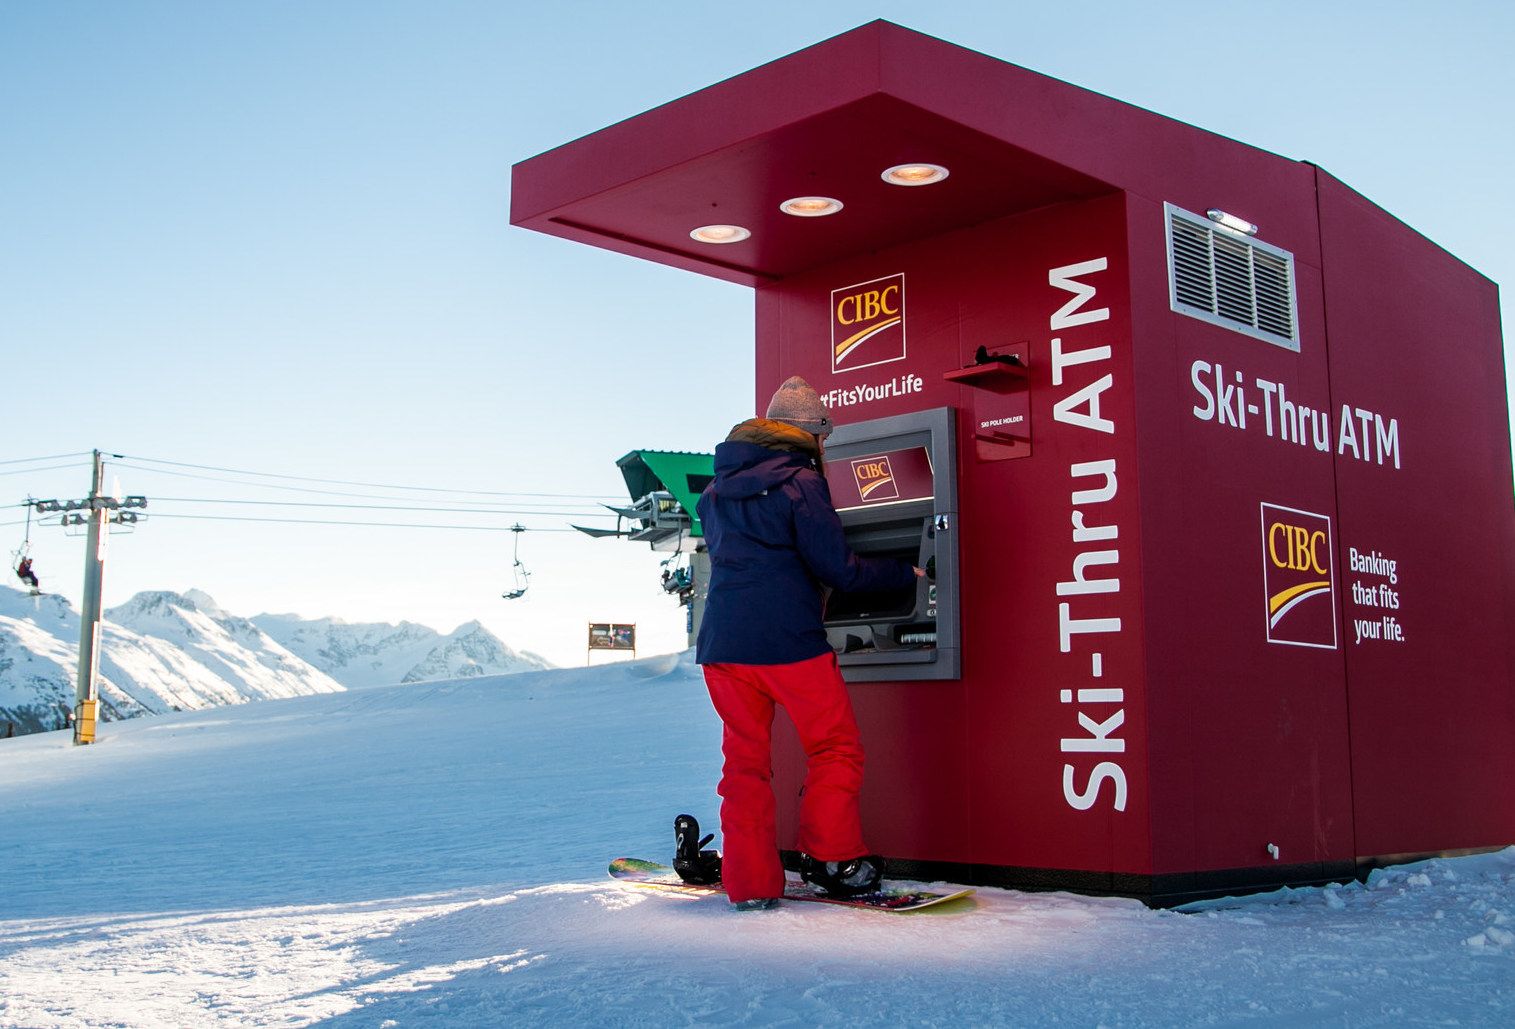 Skier using an ATM.